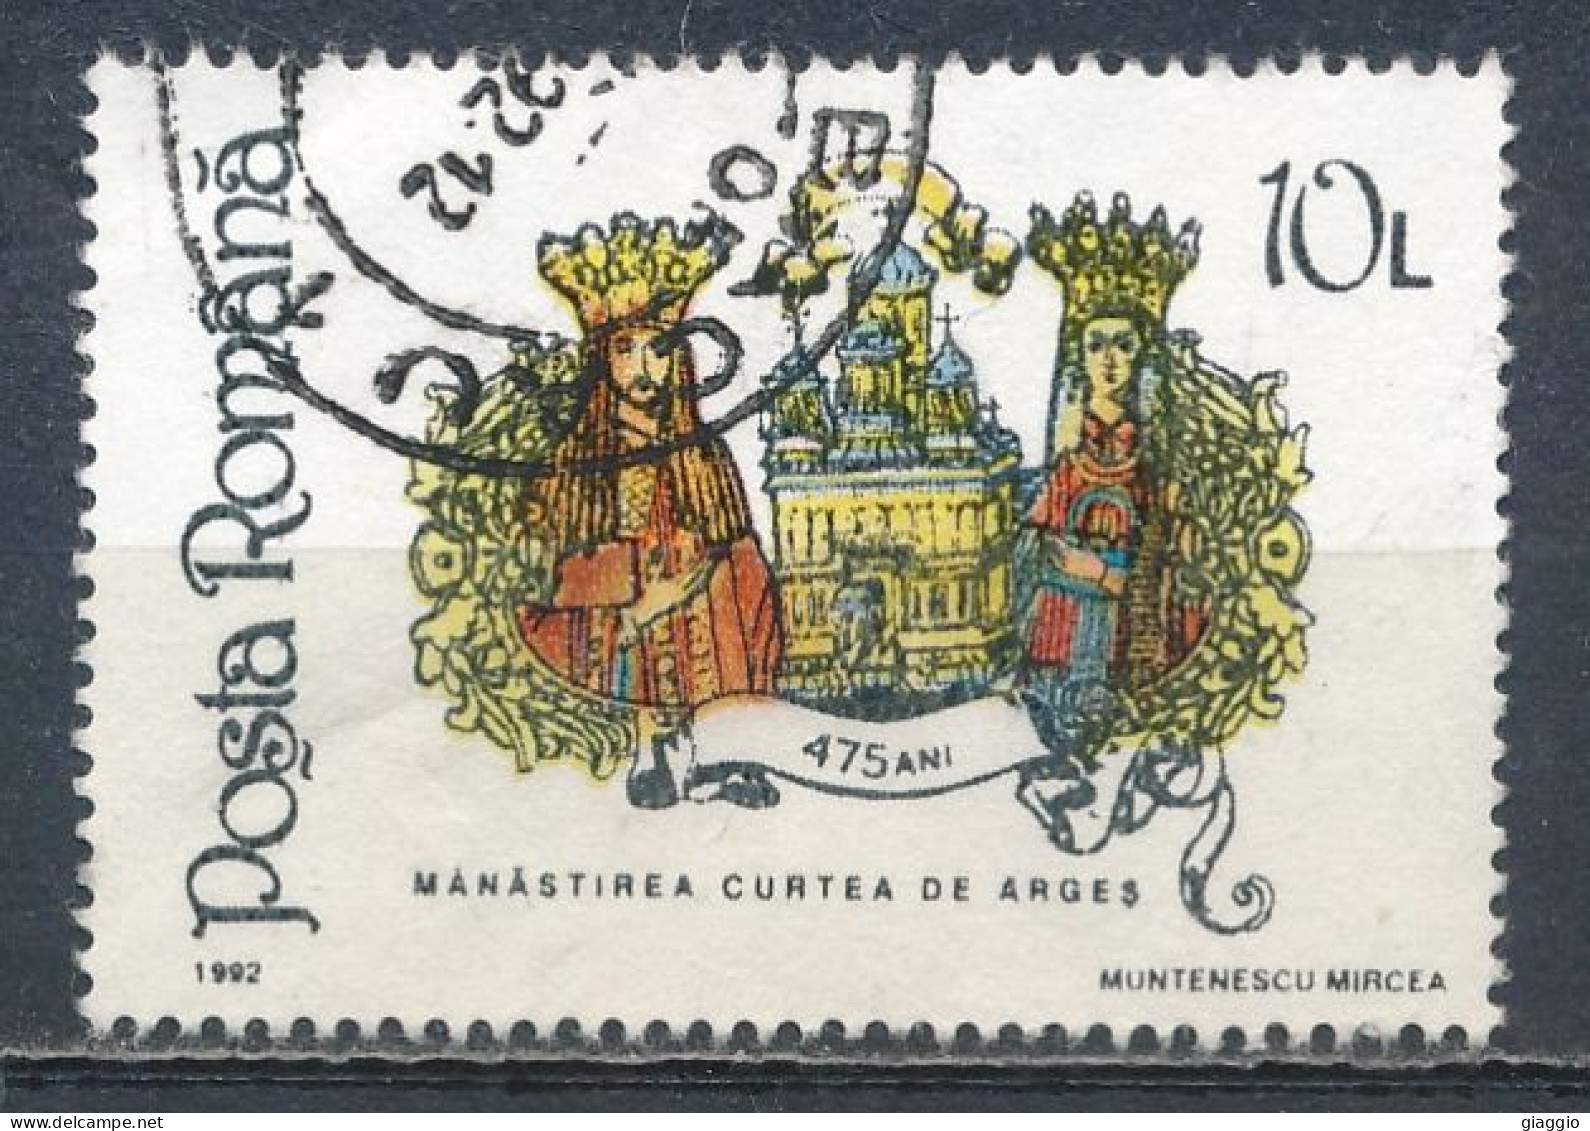 °°° ROMANIA - Y&T N° 4043 - 1992 °°° - Used Stamps